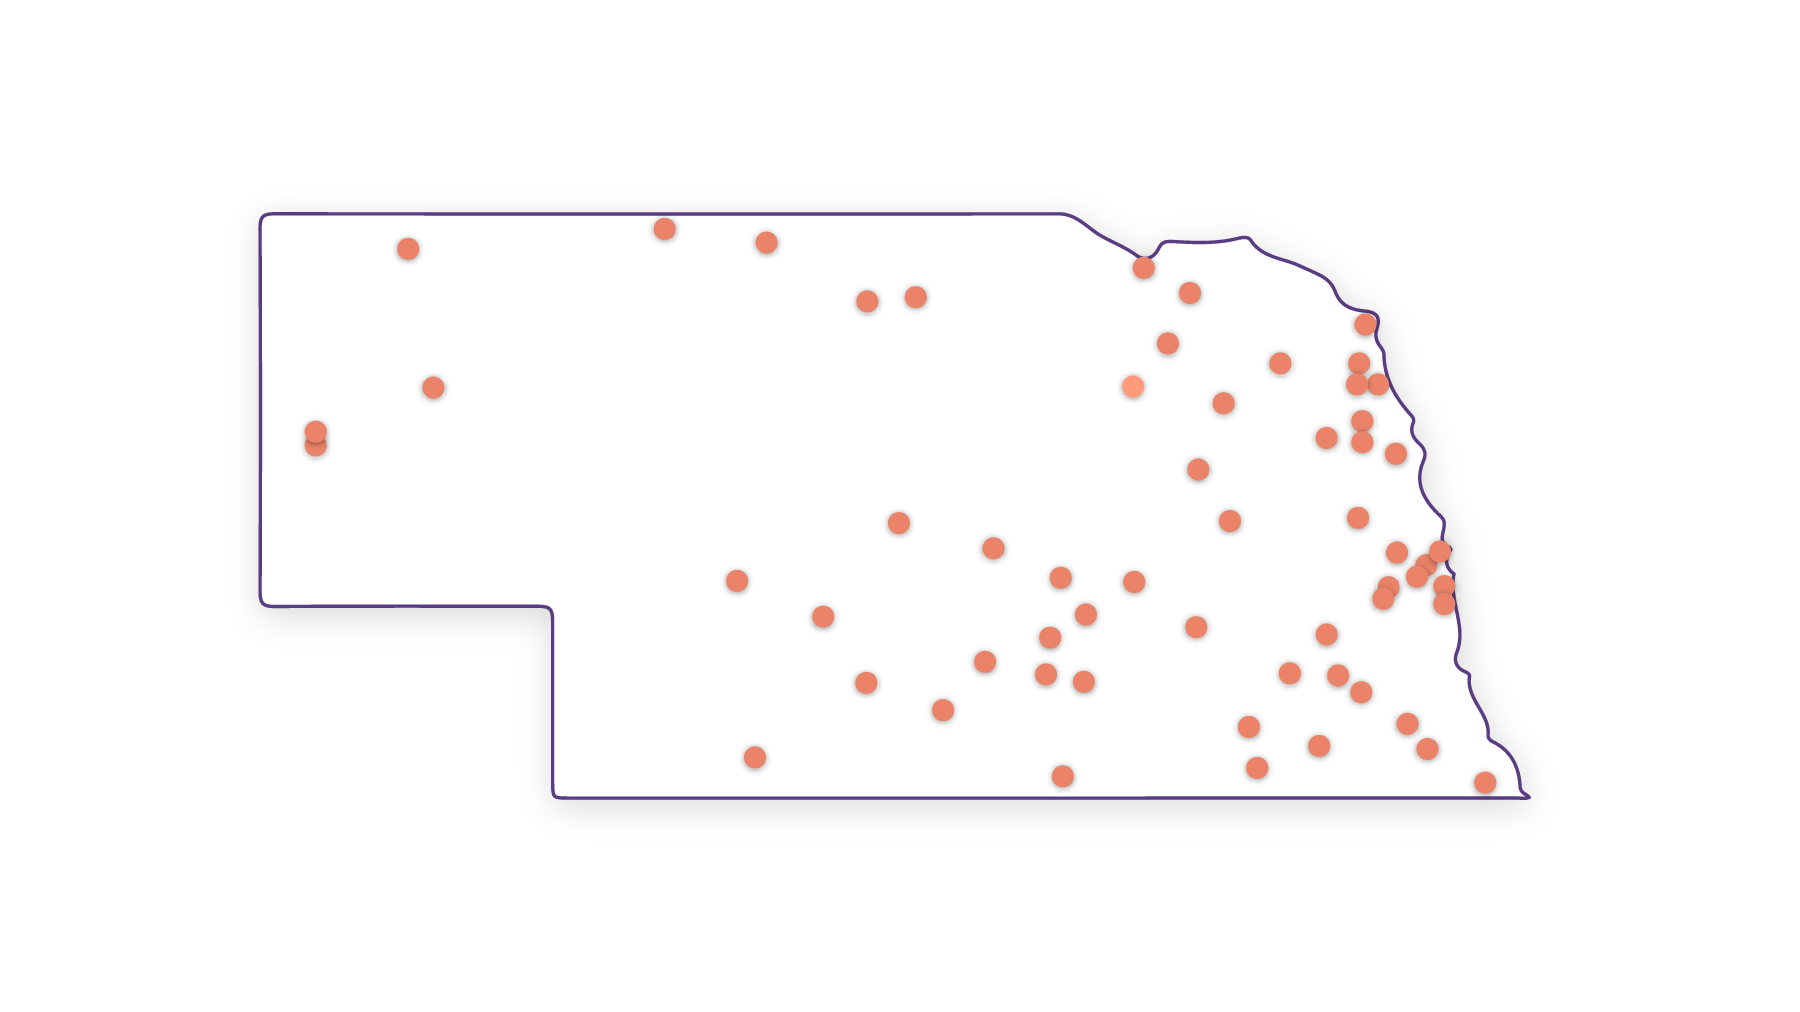 Nebraska map with dots marking cities that have received Sherwood Foundation awards.